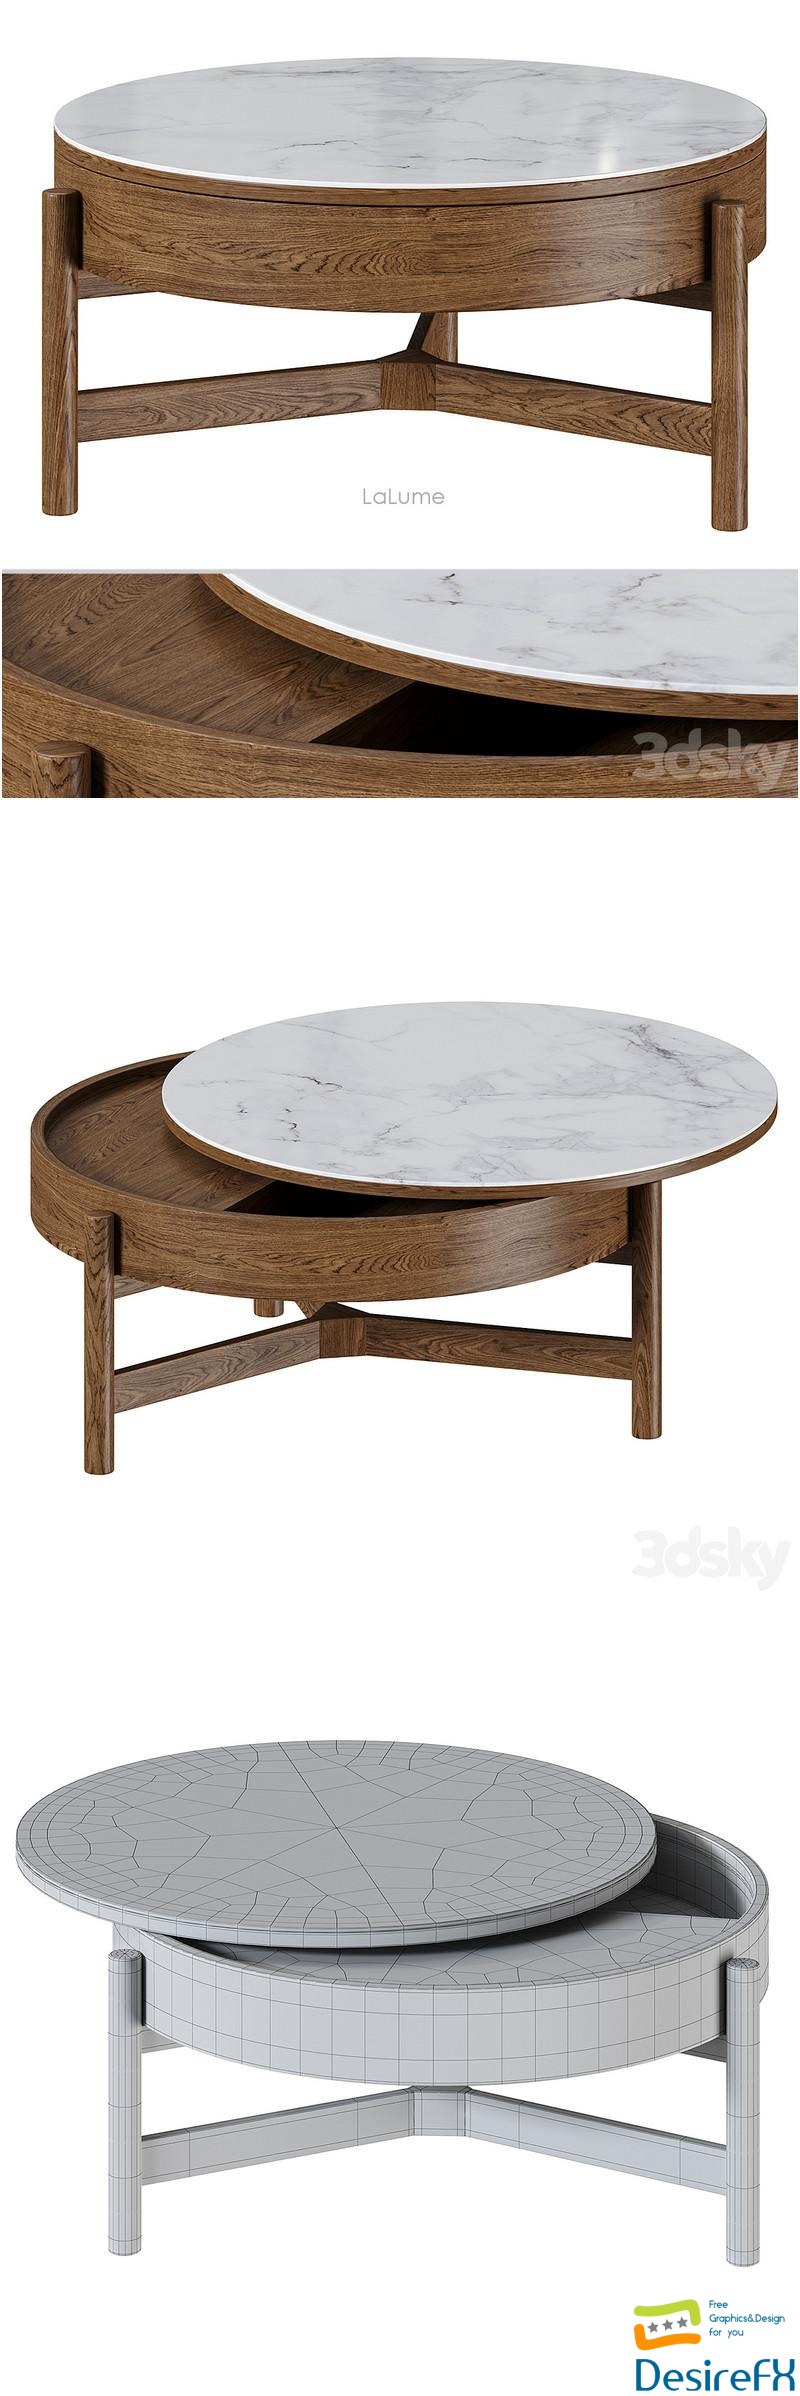 LaLume coffee table 3D Model